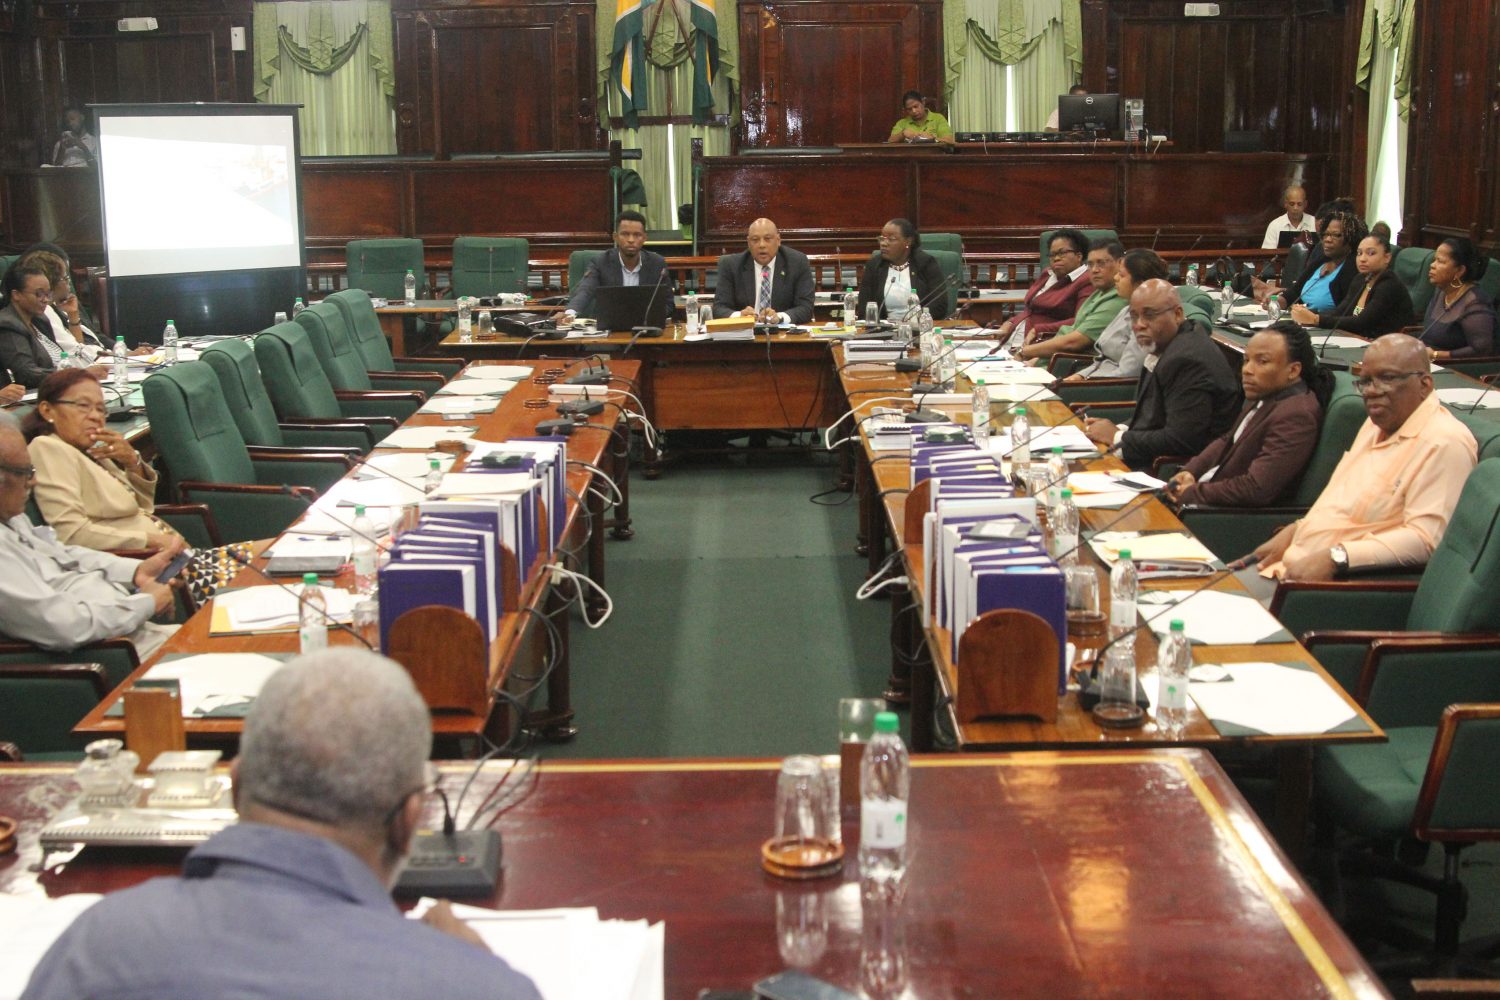 At the head of the table are Ministers of Natural Resources Raphael Trotman (at centre) and Simona Broomes (at right) with committee members at the front on both sides. (Terrence Thompson photo)